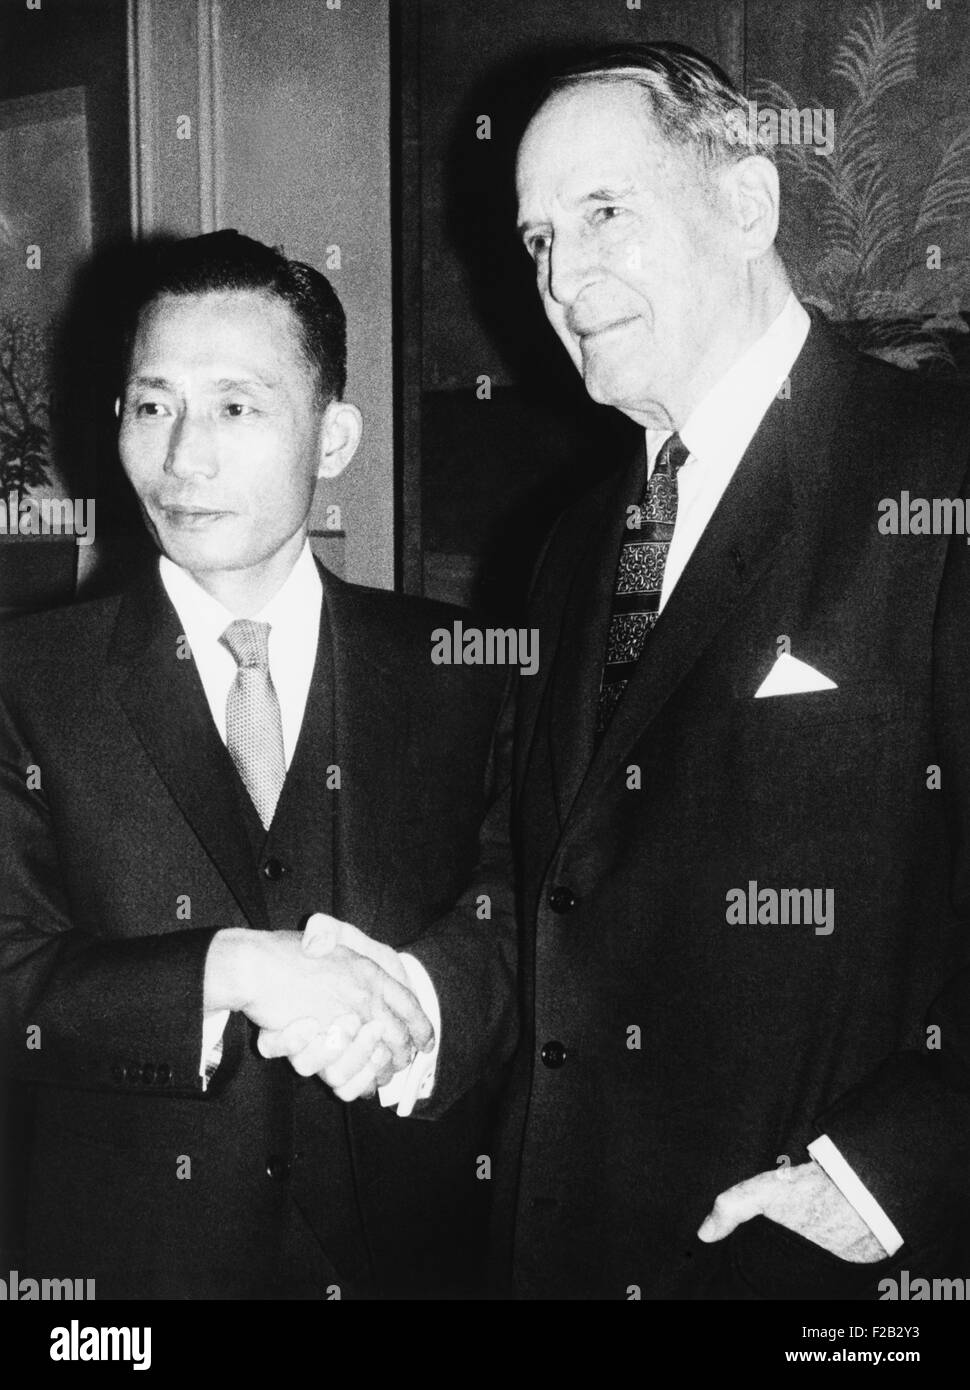 Park Chung-hee and retired General Douglas MacArthur shake hands. They met at MacArthur's Waldorf Astoria tower apartment in New York City, Nov. 18, 1961. Park was then the leader of a military coup d'état that overthrew the weak Korean Second Republic in 1961. He was elected as President of the Korean Third Republic in 1963,and was an increasingly authoritarian ruler until his 1979 assassination. (CSU 2015 7 299) Stock Photo